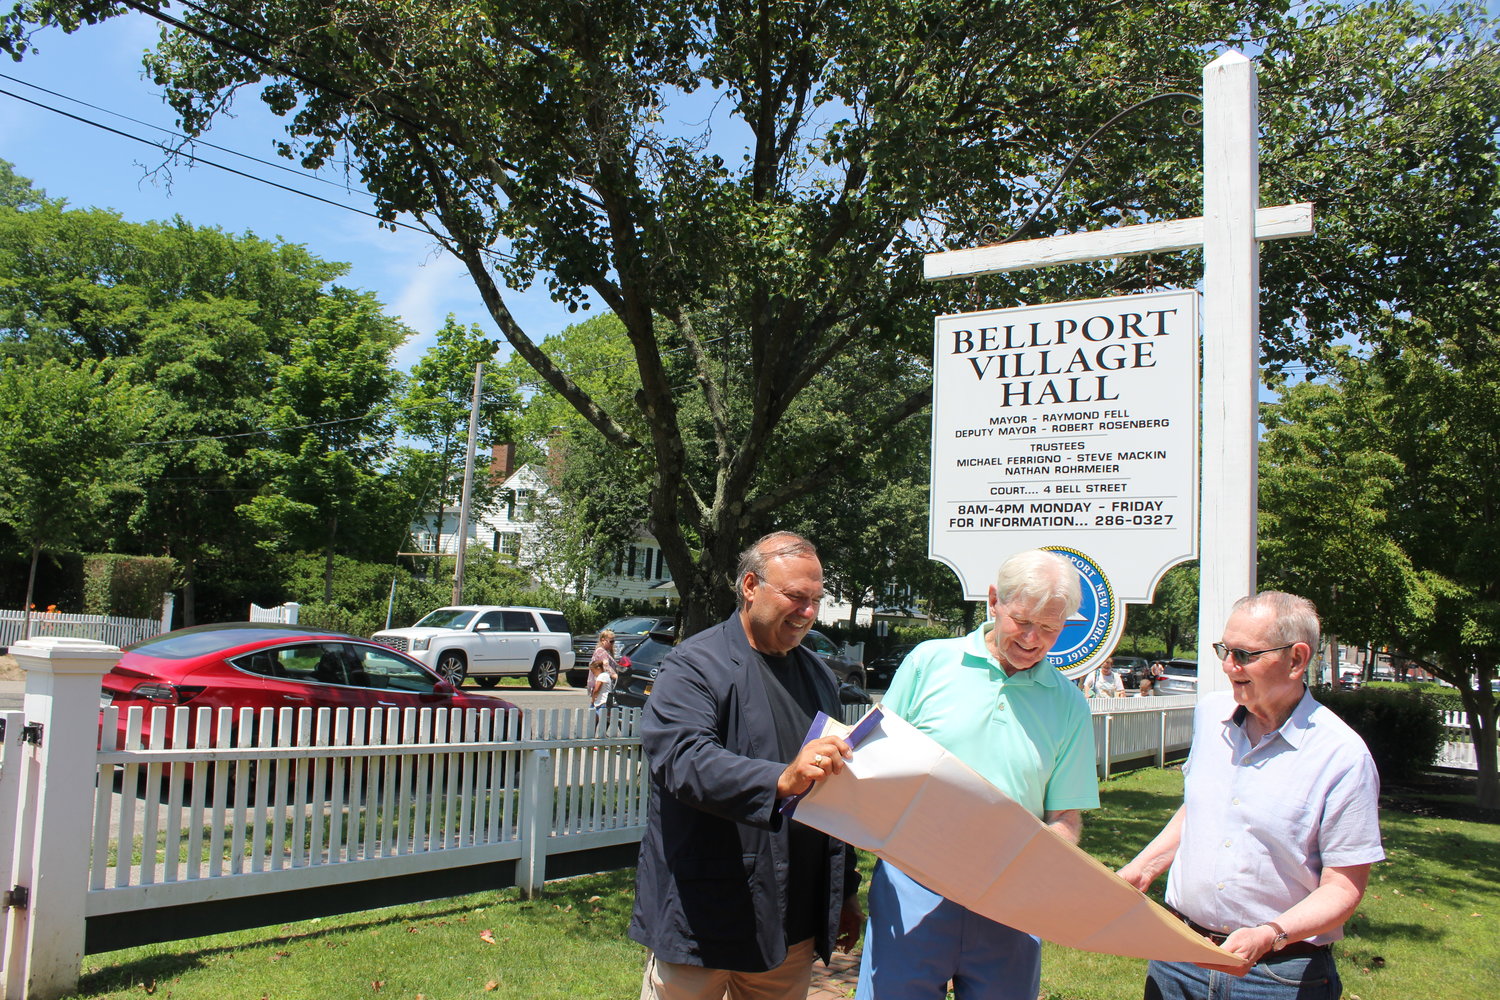 Village clerk John Kocay, mayor Ray Fell, and Environmental Committee chair Marc Rauch look over village possibilities for a Johnson Controls survey.